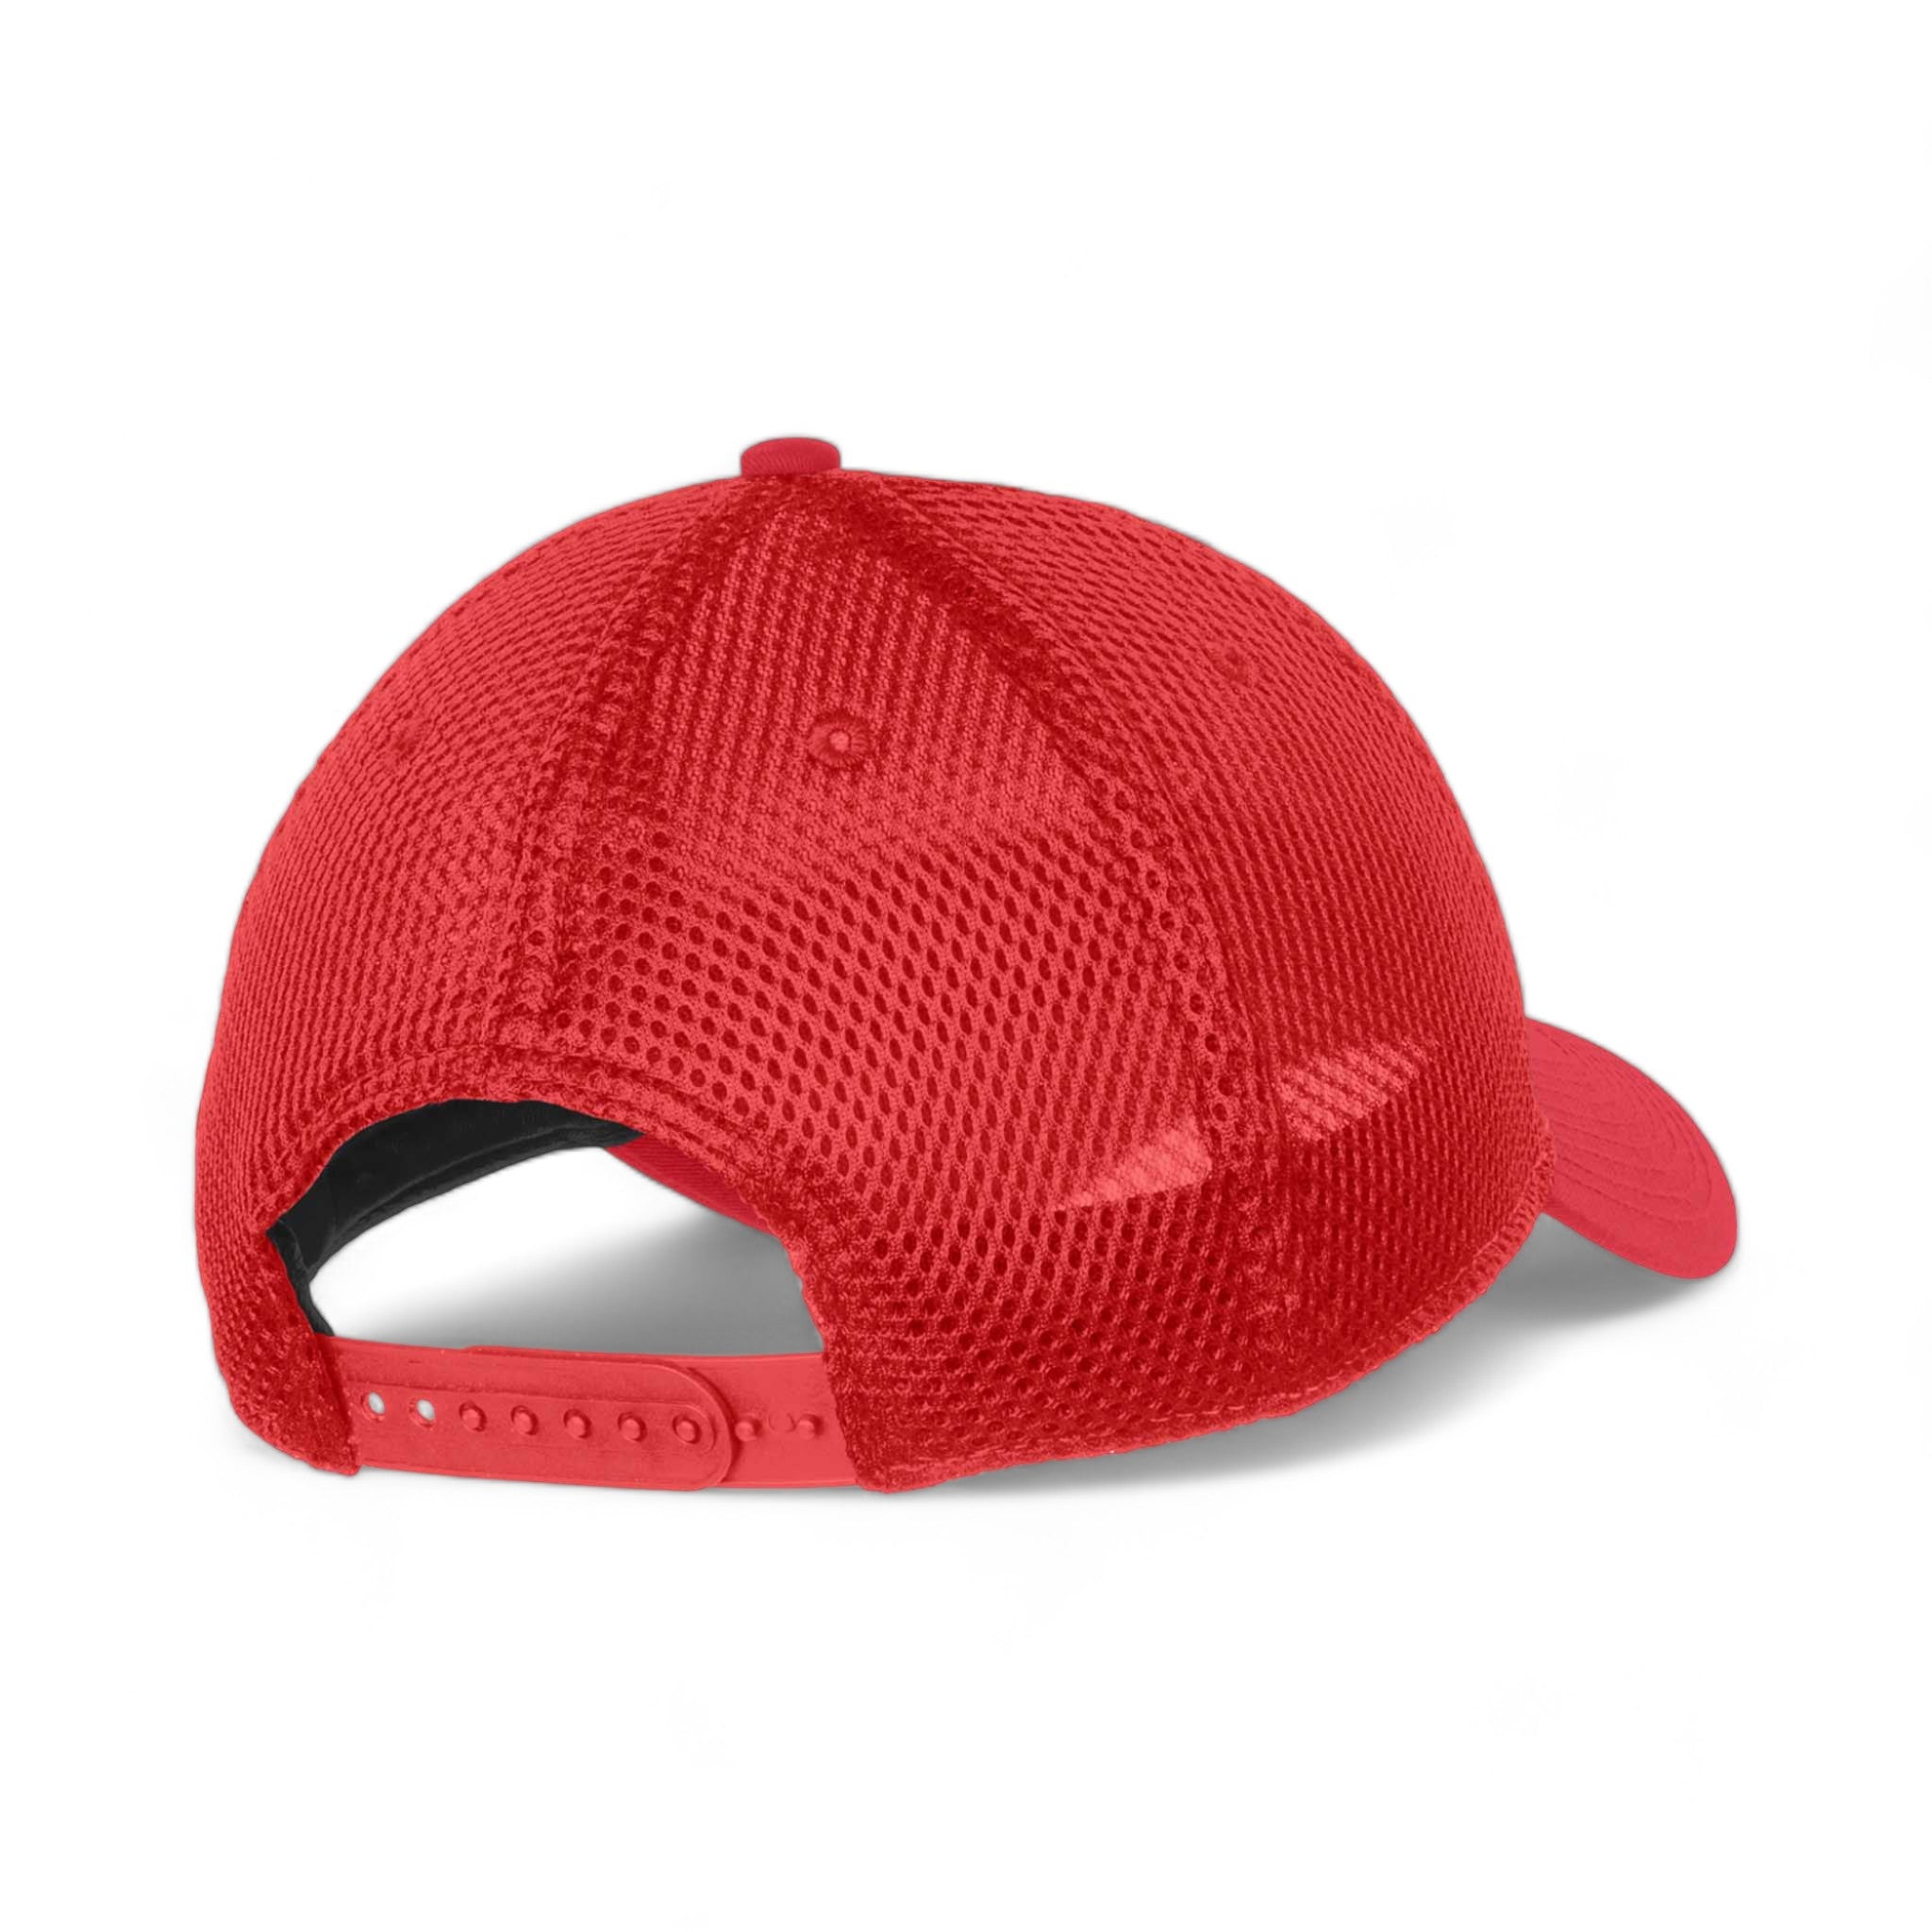 Back view of New Era NE204 custom hat in white and scarlet red